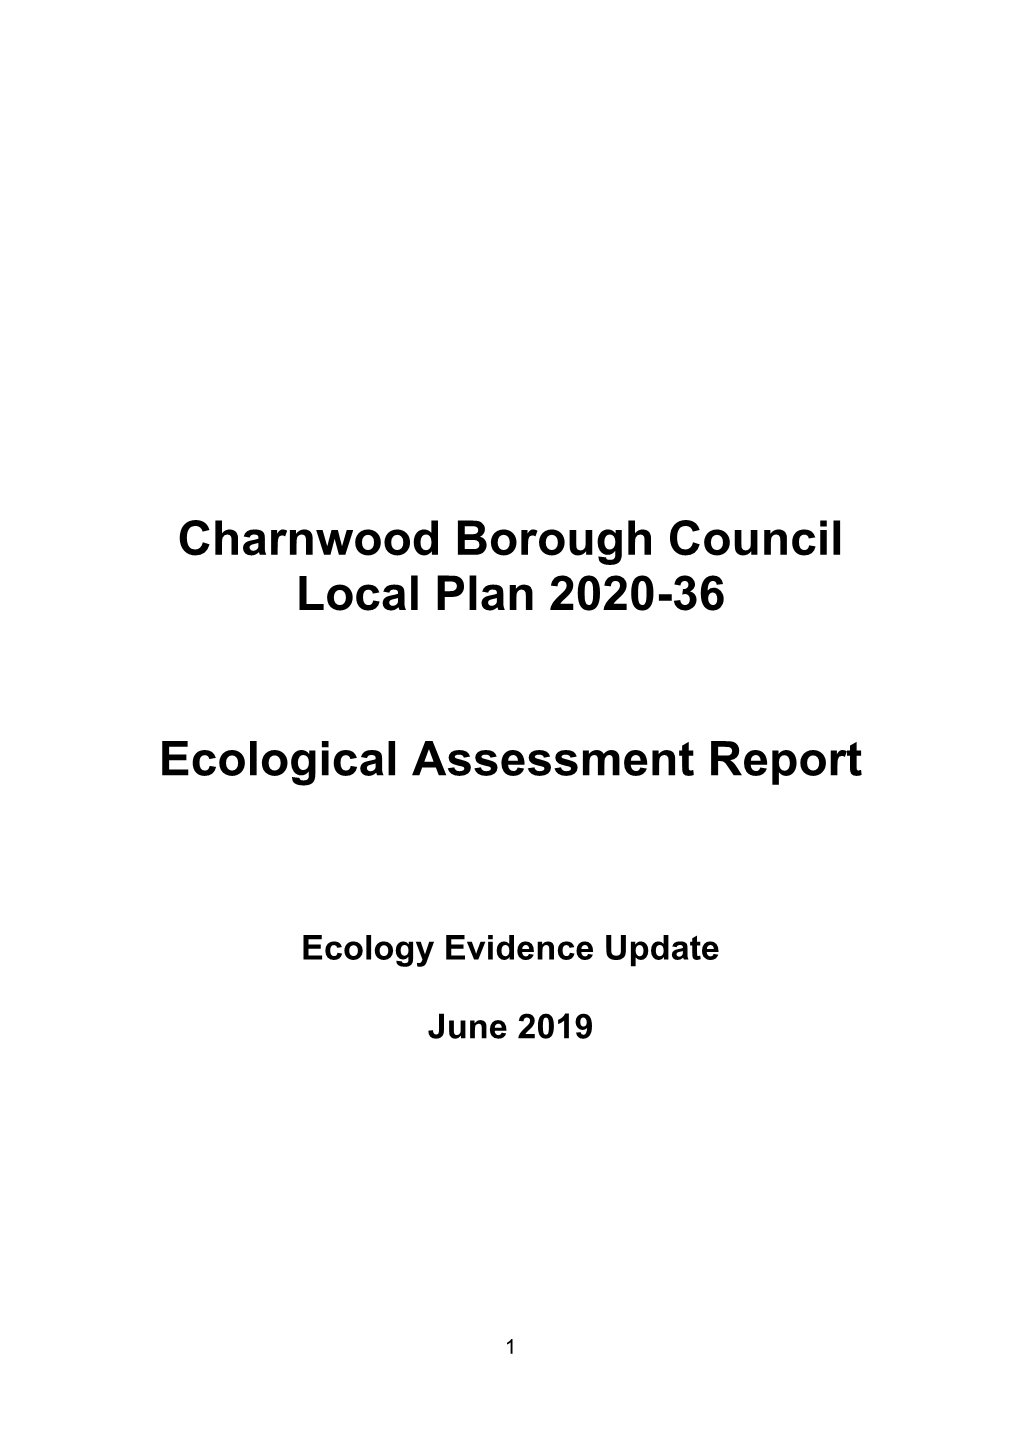 Ecological Assessment Report 2019